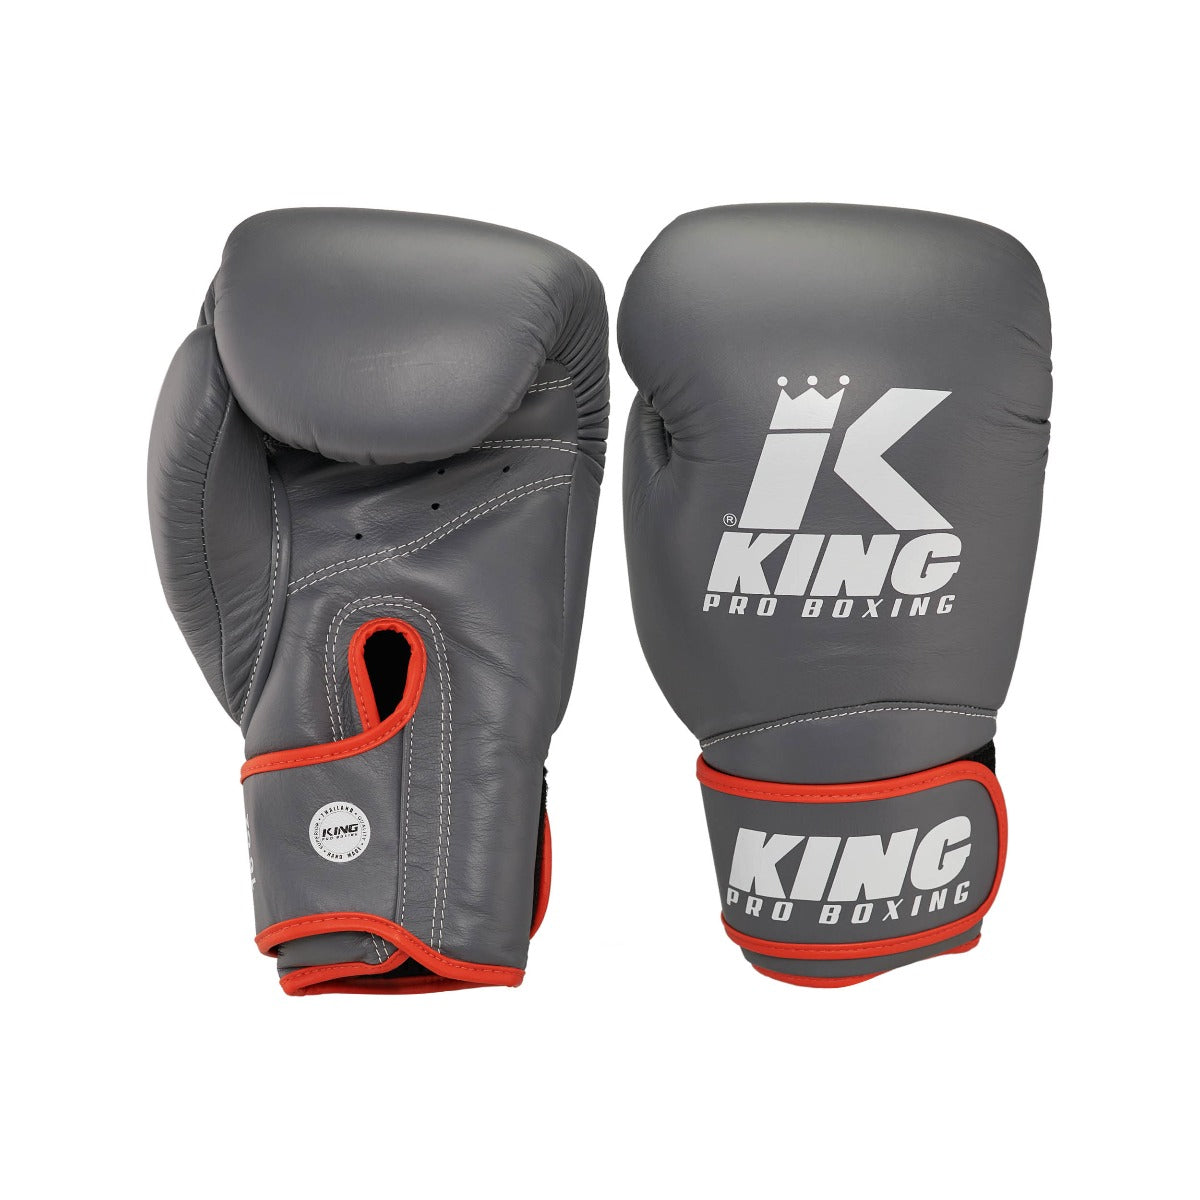 King PRO boxing boxing gloves - STAR 14